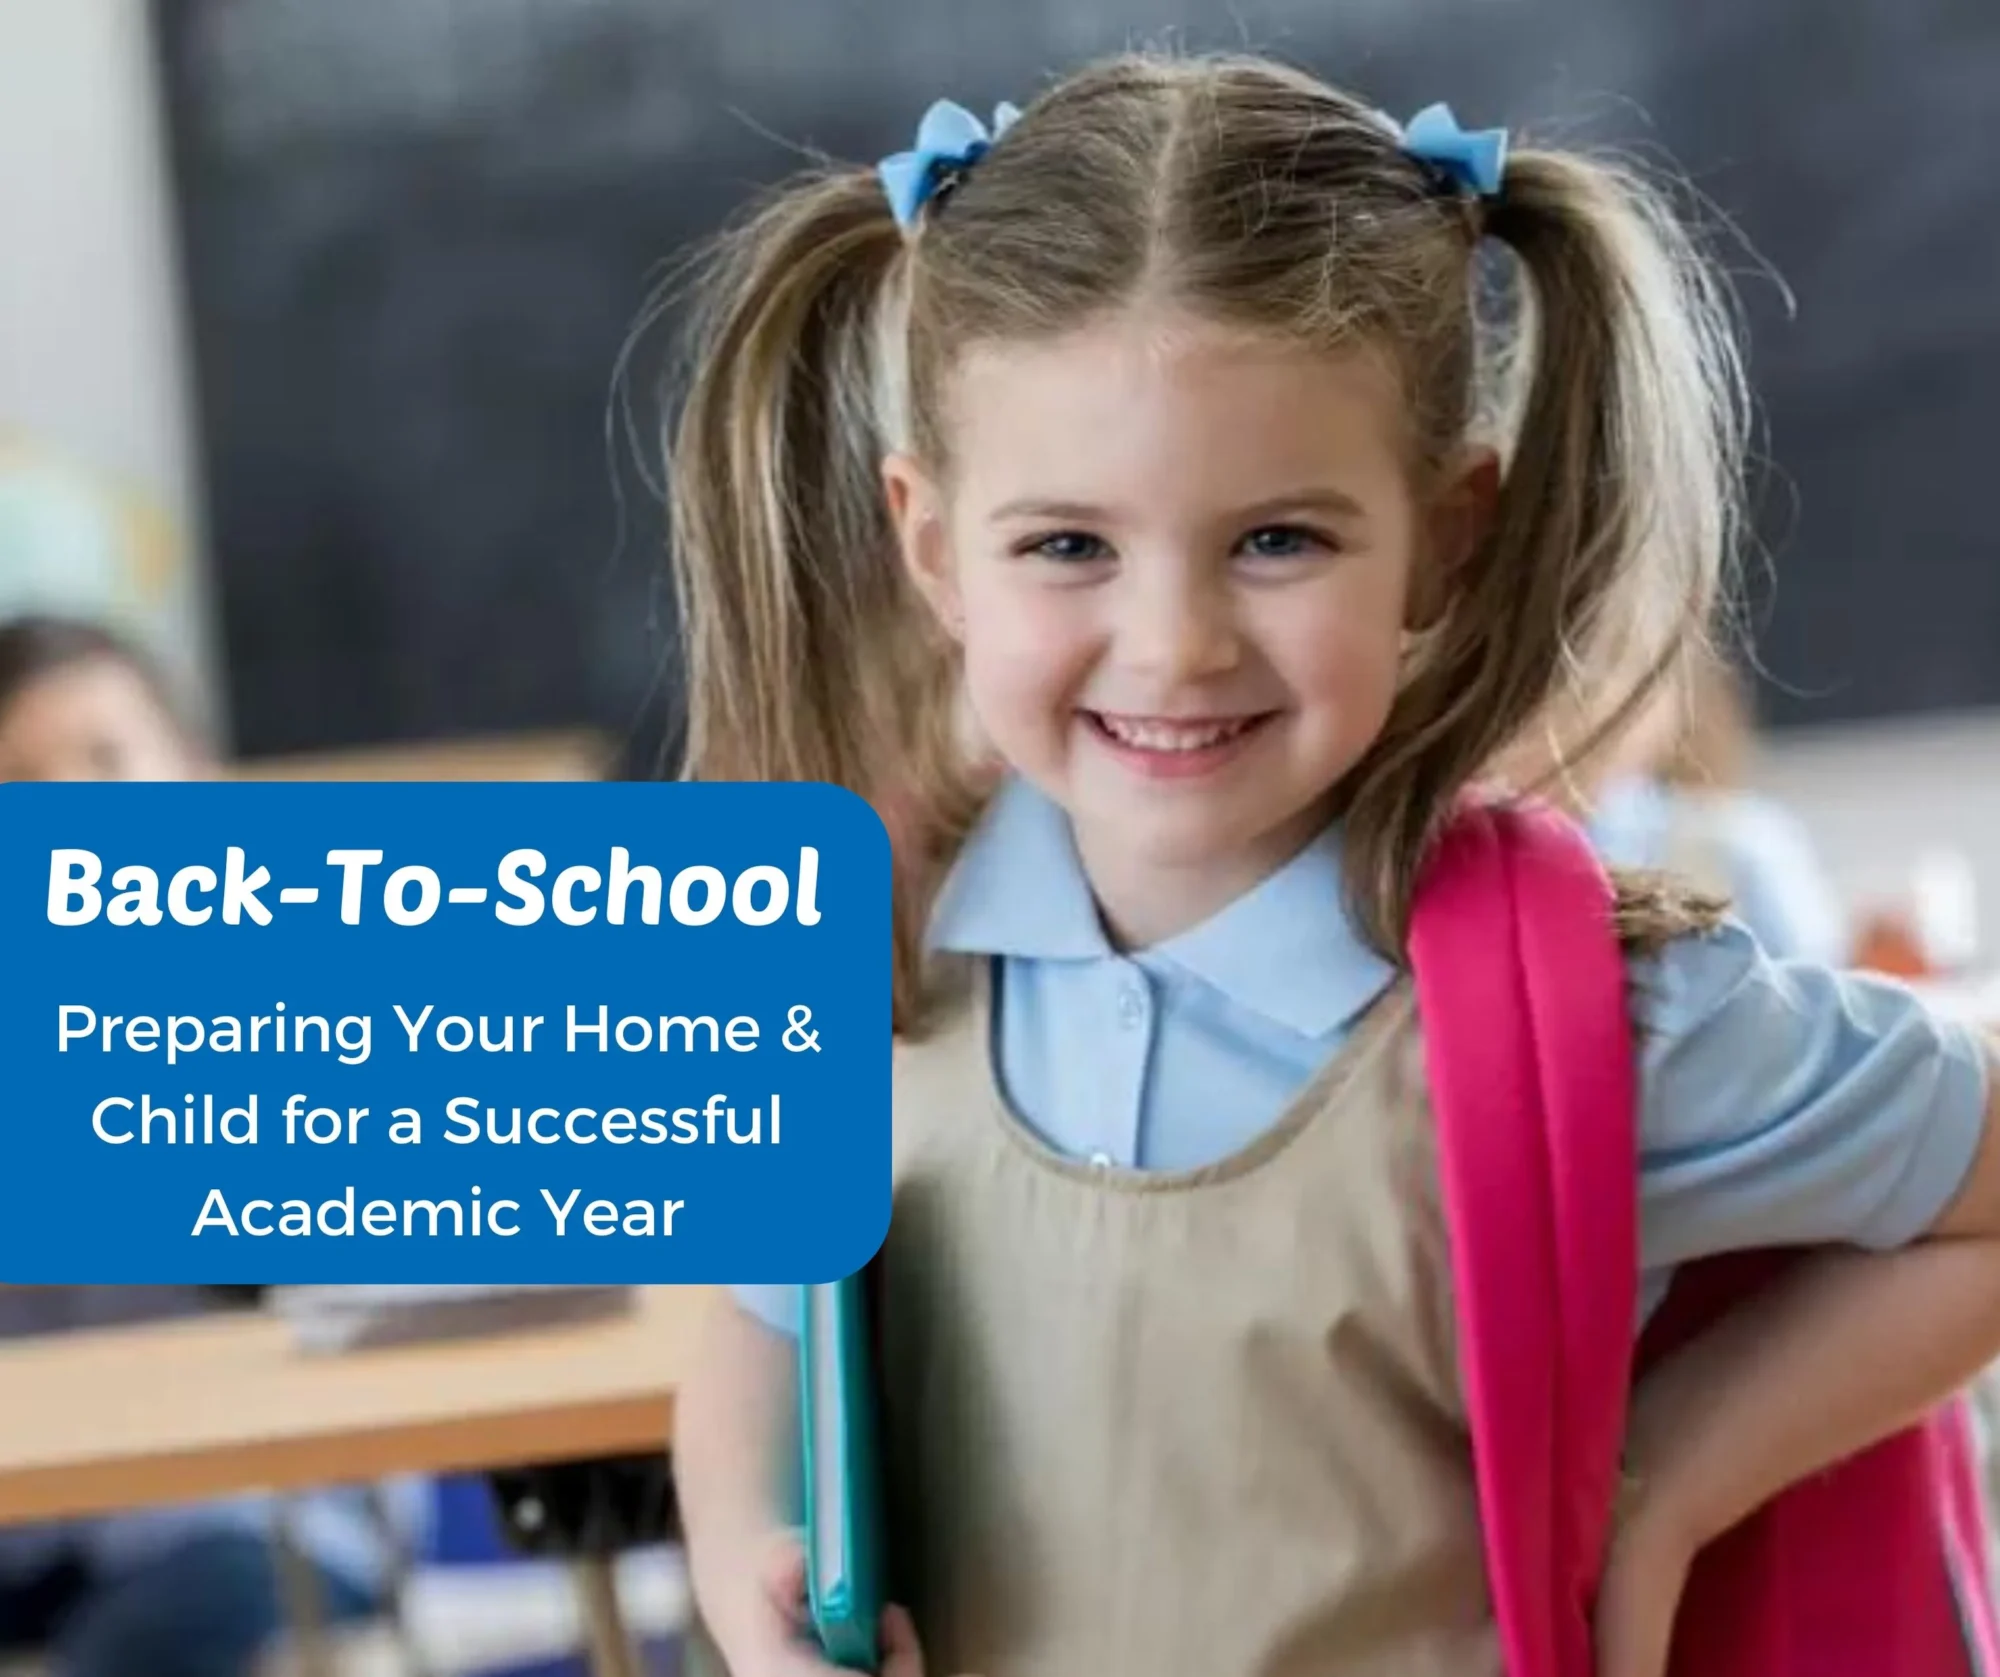 Preparing Your Home and Child for a Successful Academic Year